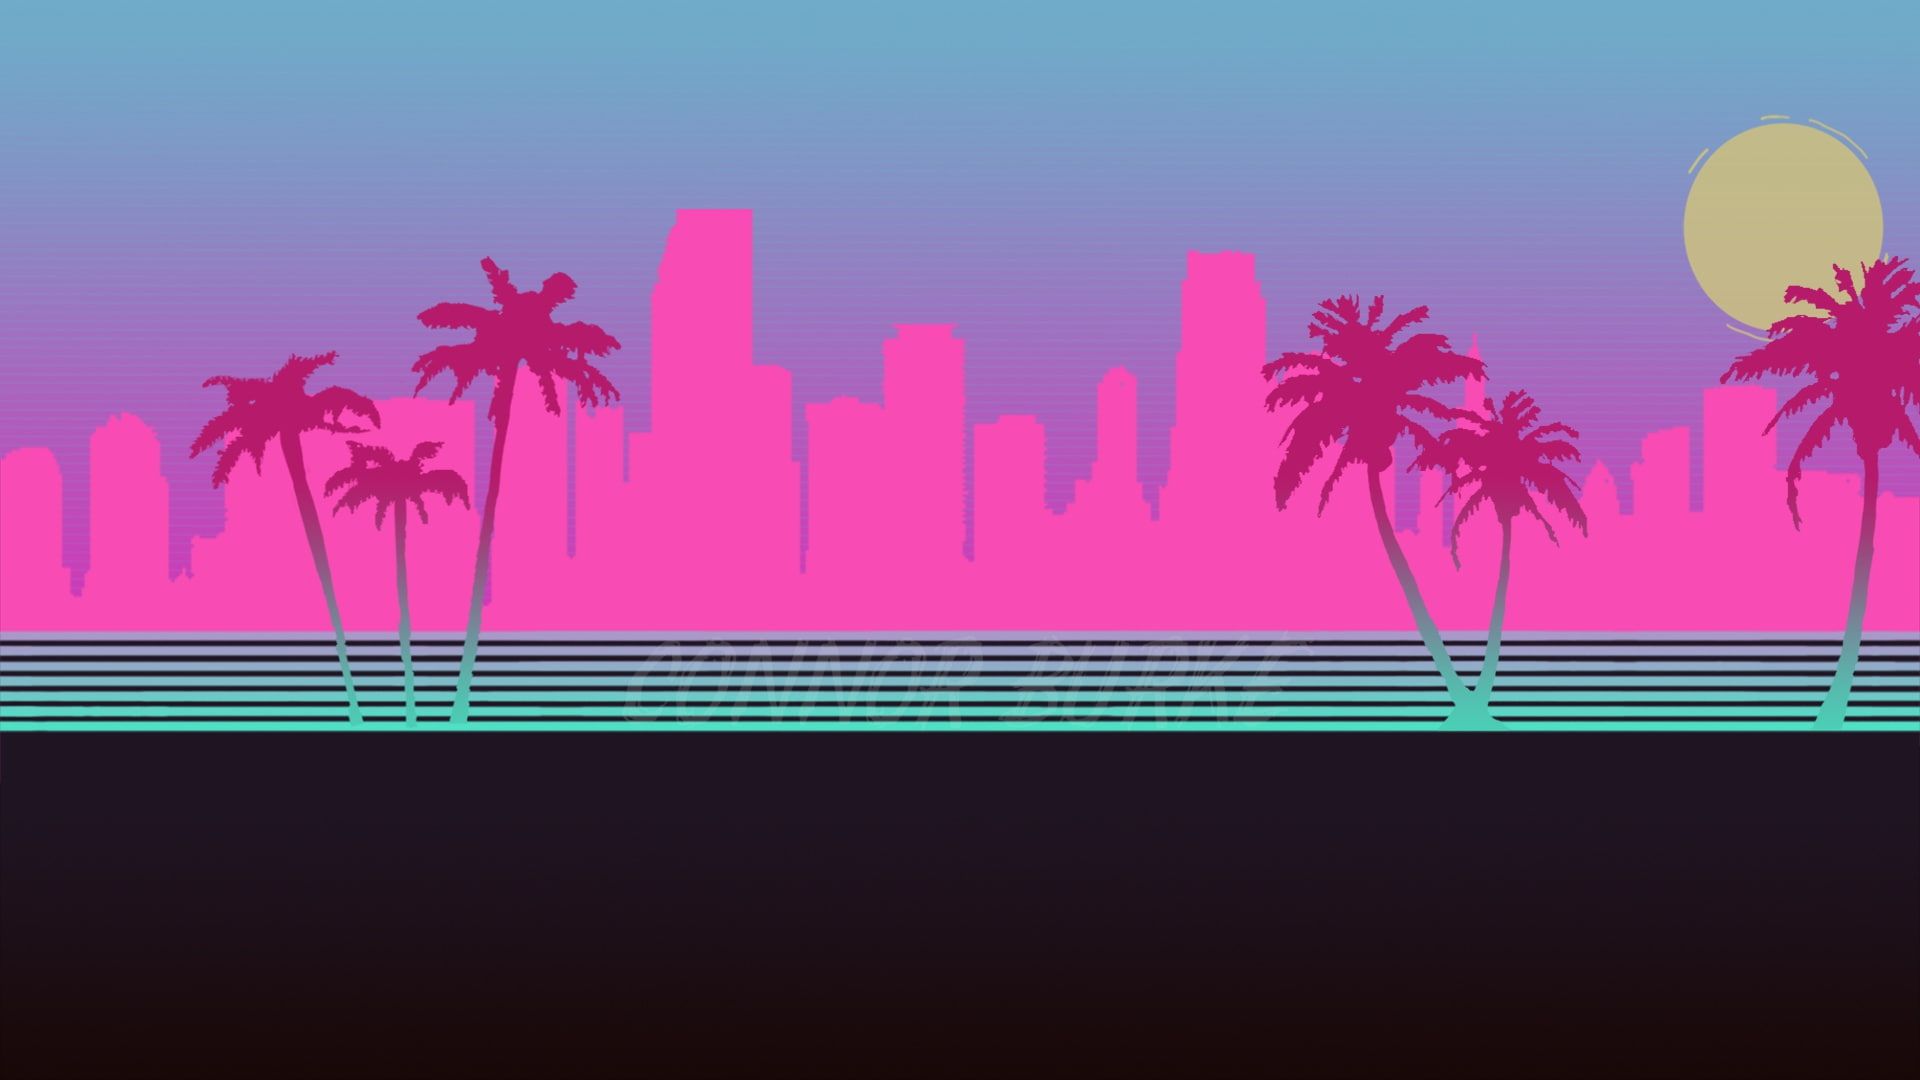 The city #Neon Palm trees #Silhouette #Background Hotline Miami #Synthpop #Darkwave #Synth #Retrowave #Synthwave. Vaporwave wallpaper, Miami wallpaper, Vaporwave